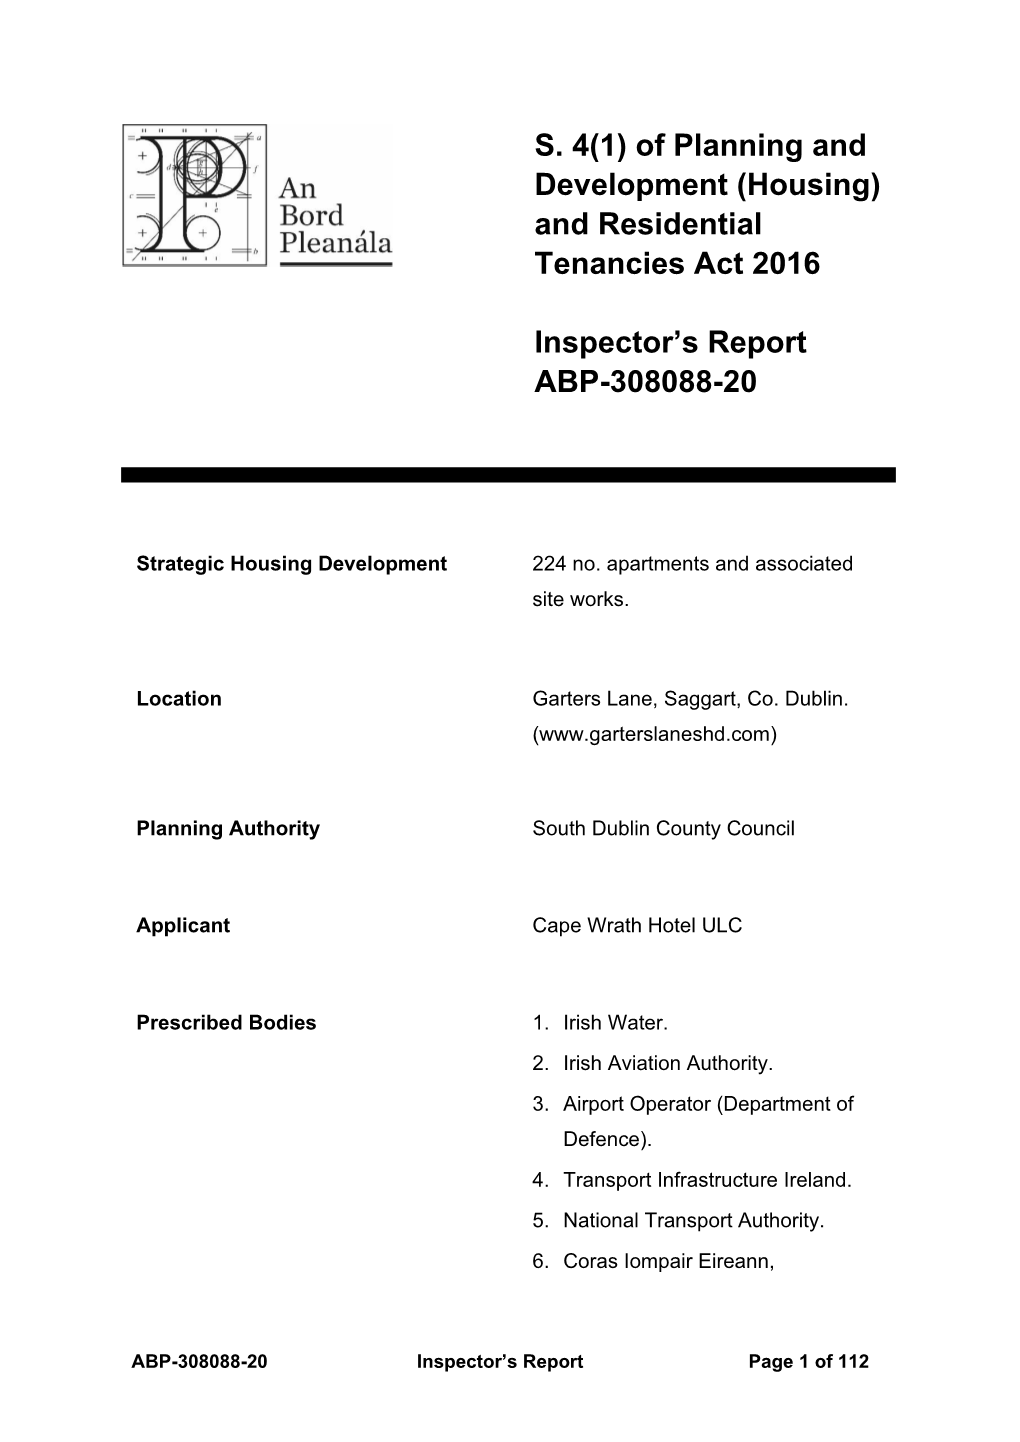 S. 4(1) of Planning and Development (Housing) and Residential Tenancies Act 2016 Inspector's Report ABP-308088-20